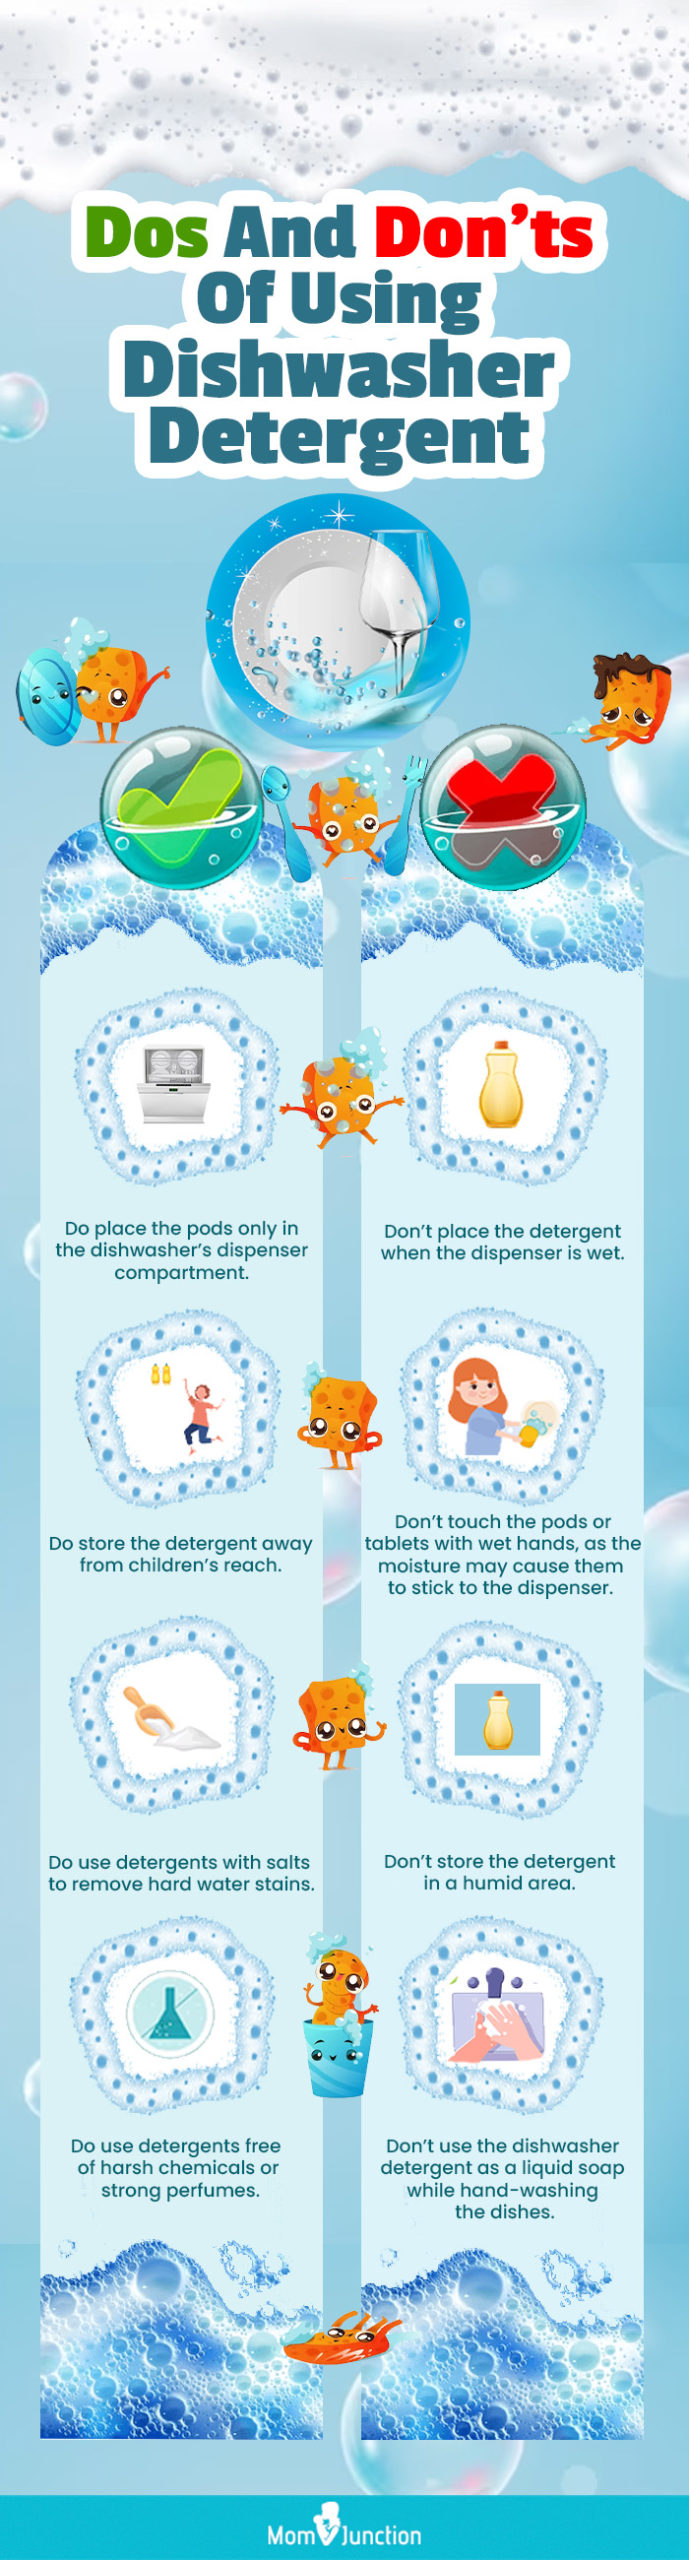 Dos And Don’ts Of Using Dishwasher Detergent (infographic)